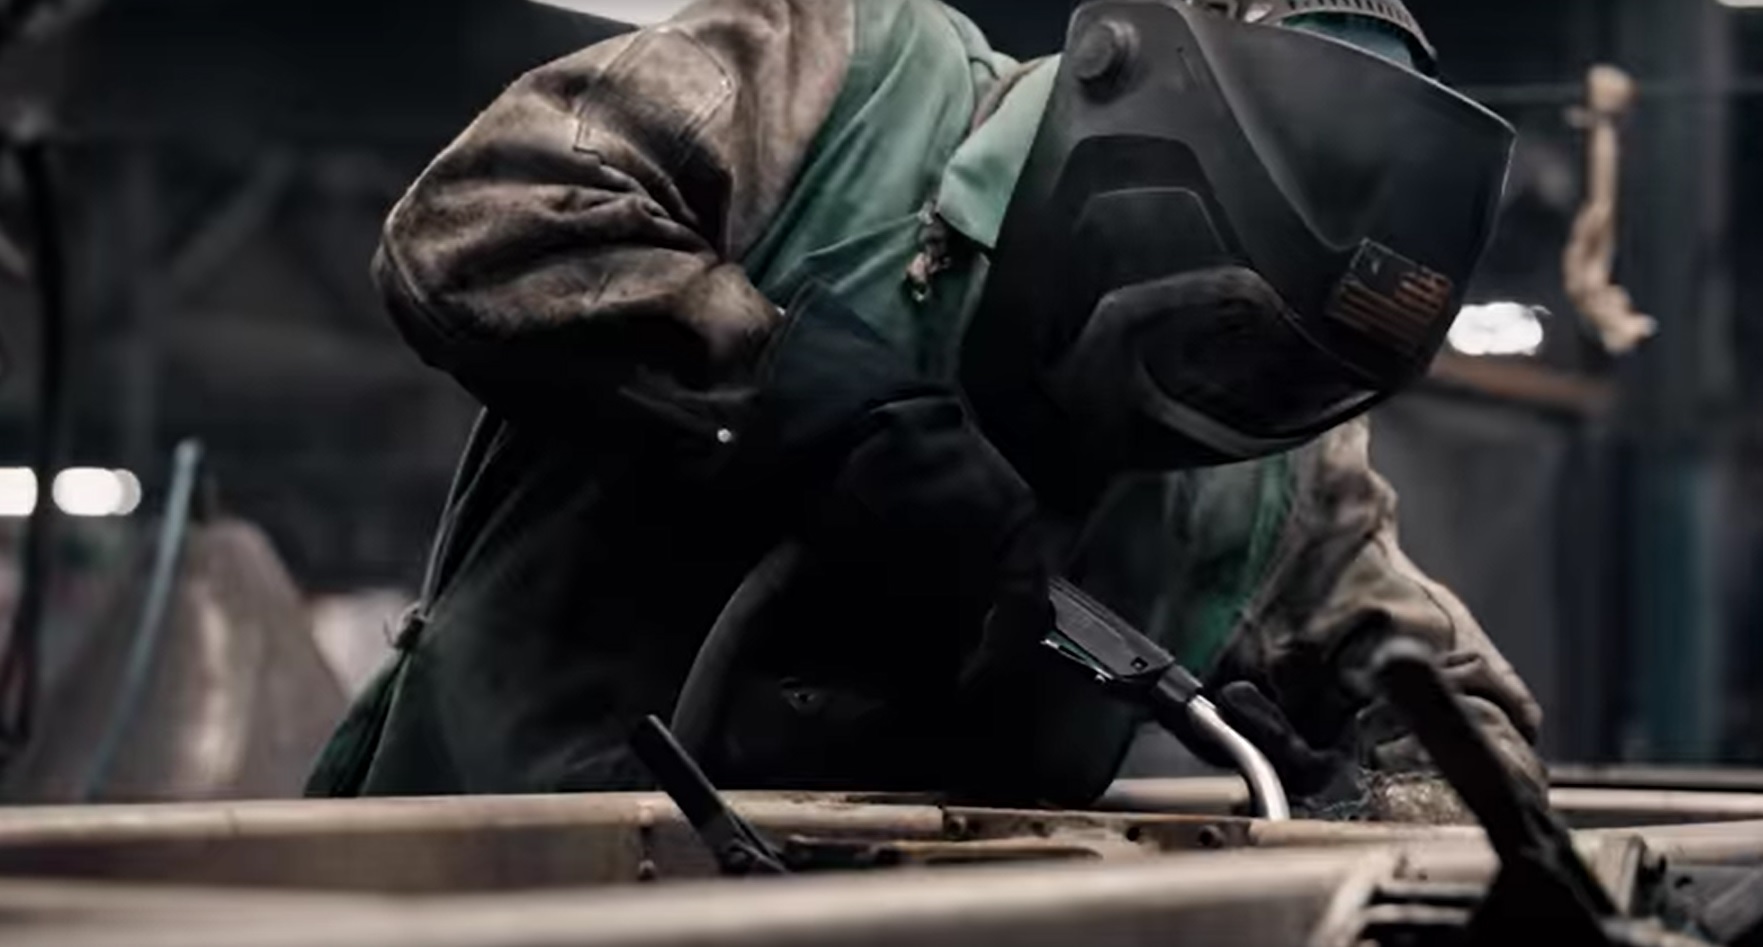 I’m a Welder and I starred in an award-winning campaign -Featured Image